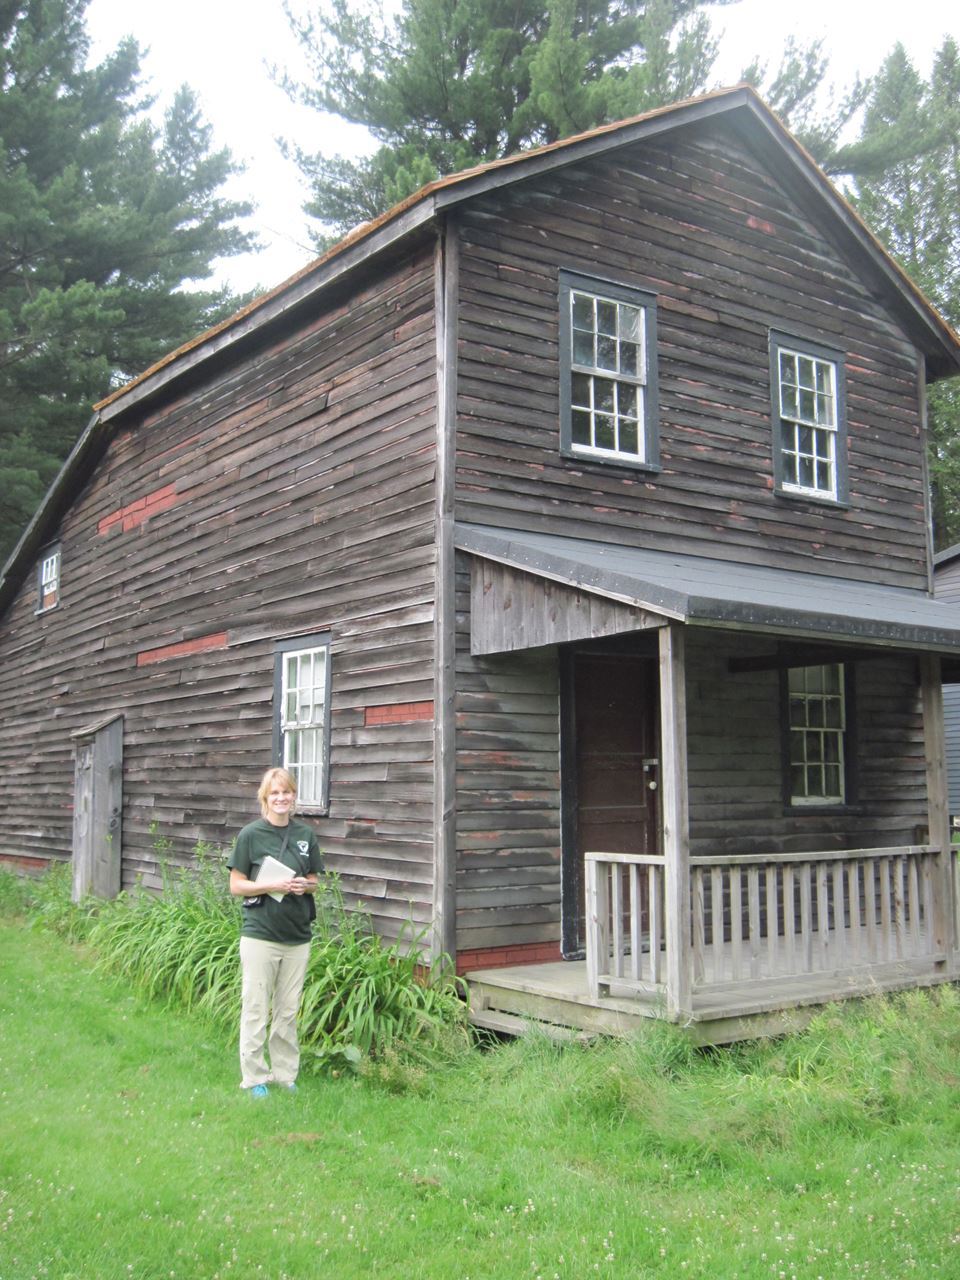 2017 fellow V. Camille Westmont at her project site, Eckley Miners' Village in Pennsylvania